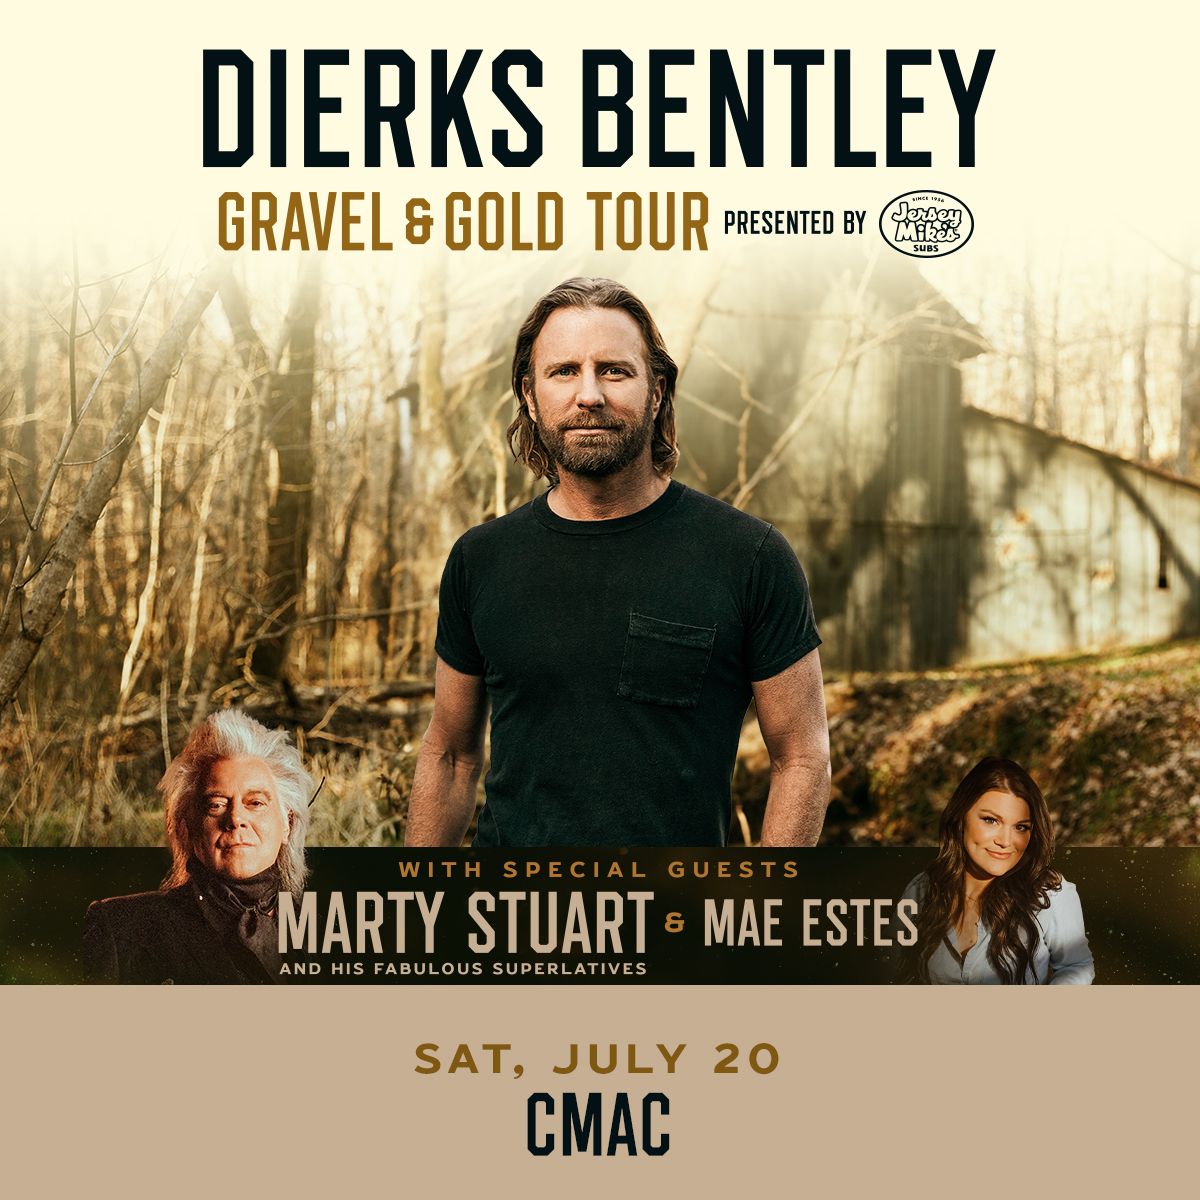 @DierksBentley “Gravel & Gold tour” with Marty Stuart & Mae Estes will roll into @cmacevents on July 20th. Tickets go on sale Friday, 4/26 @ 10am at ticketmaster.com but listen to the Bee Morning Coffee Club at 7:25am for your chance to win your way into the show!